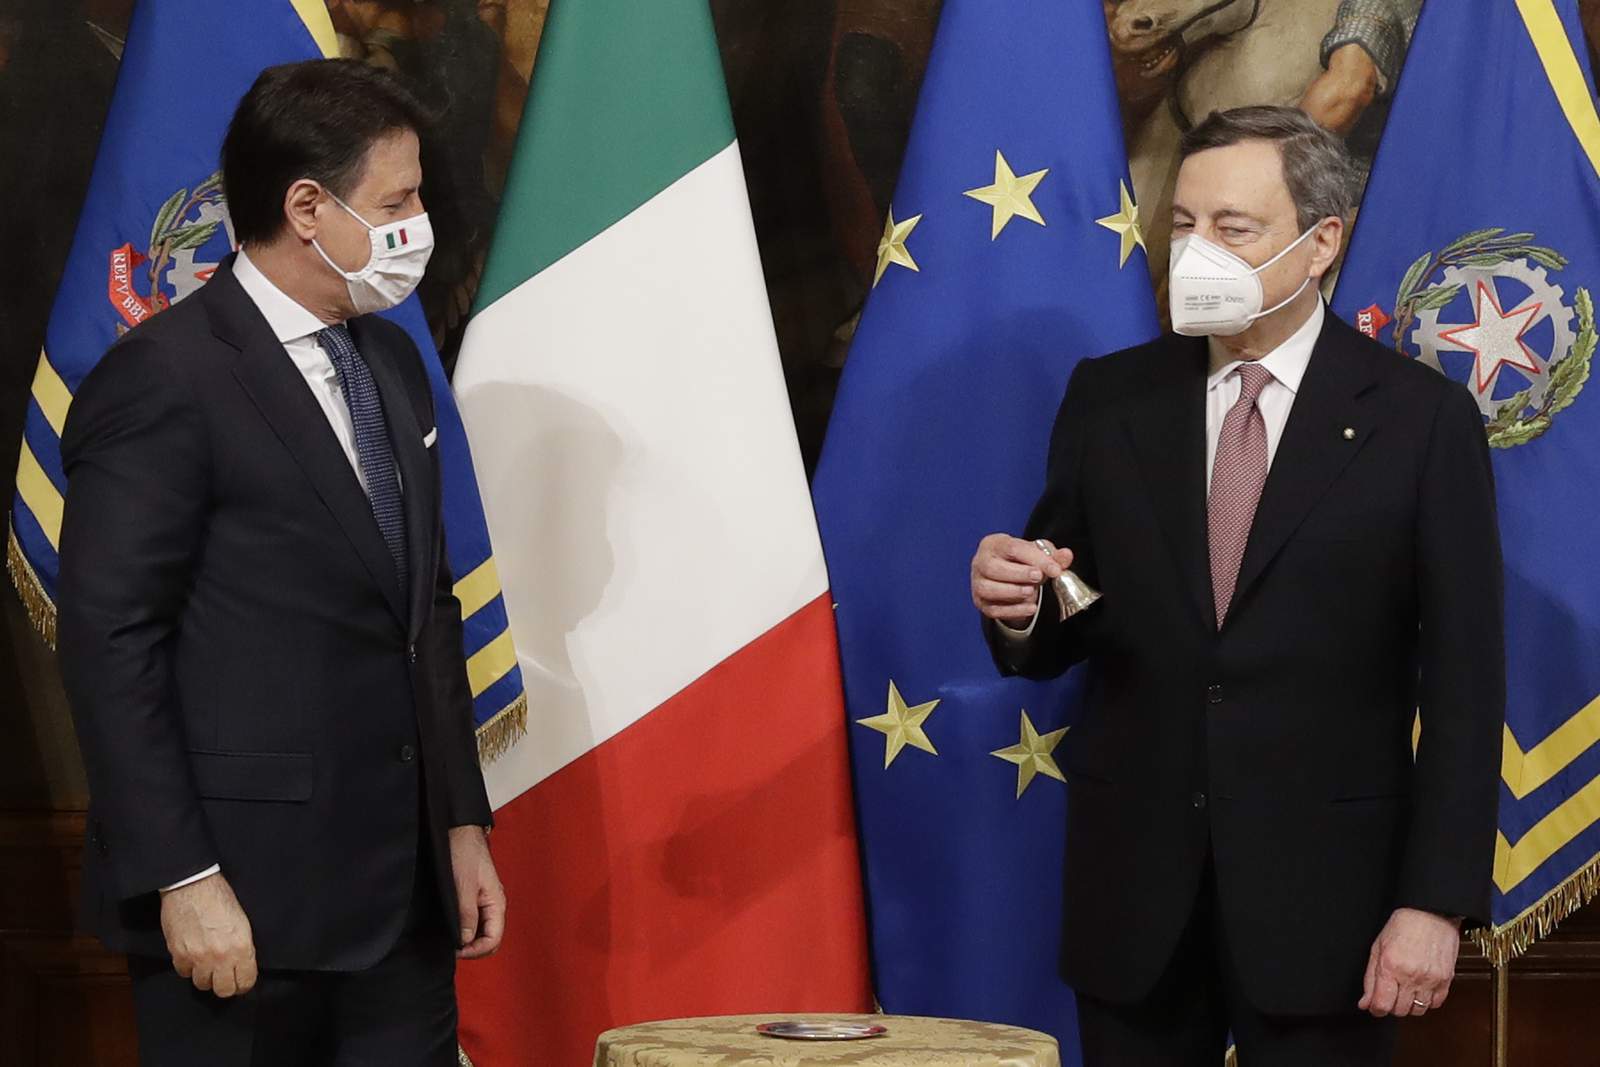 Draghi takes helm in Italy, focused on pandemic recovery aid